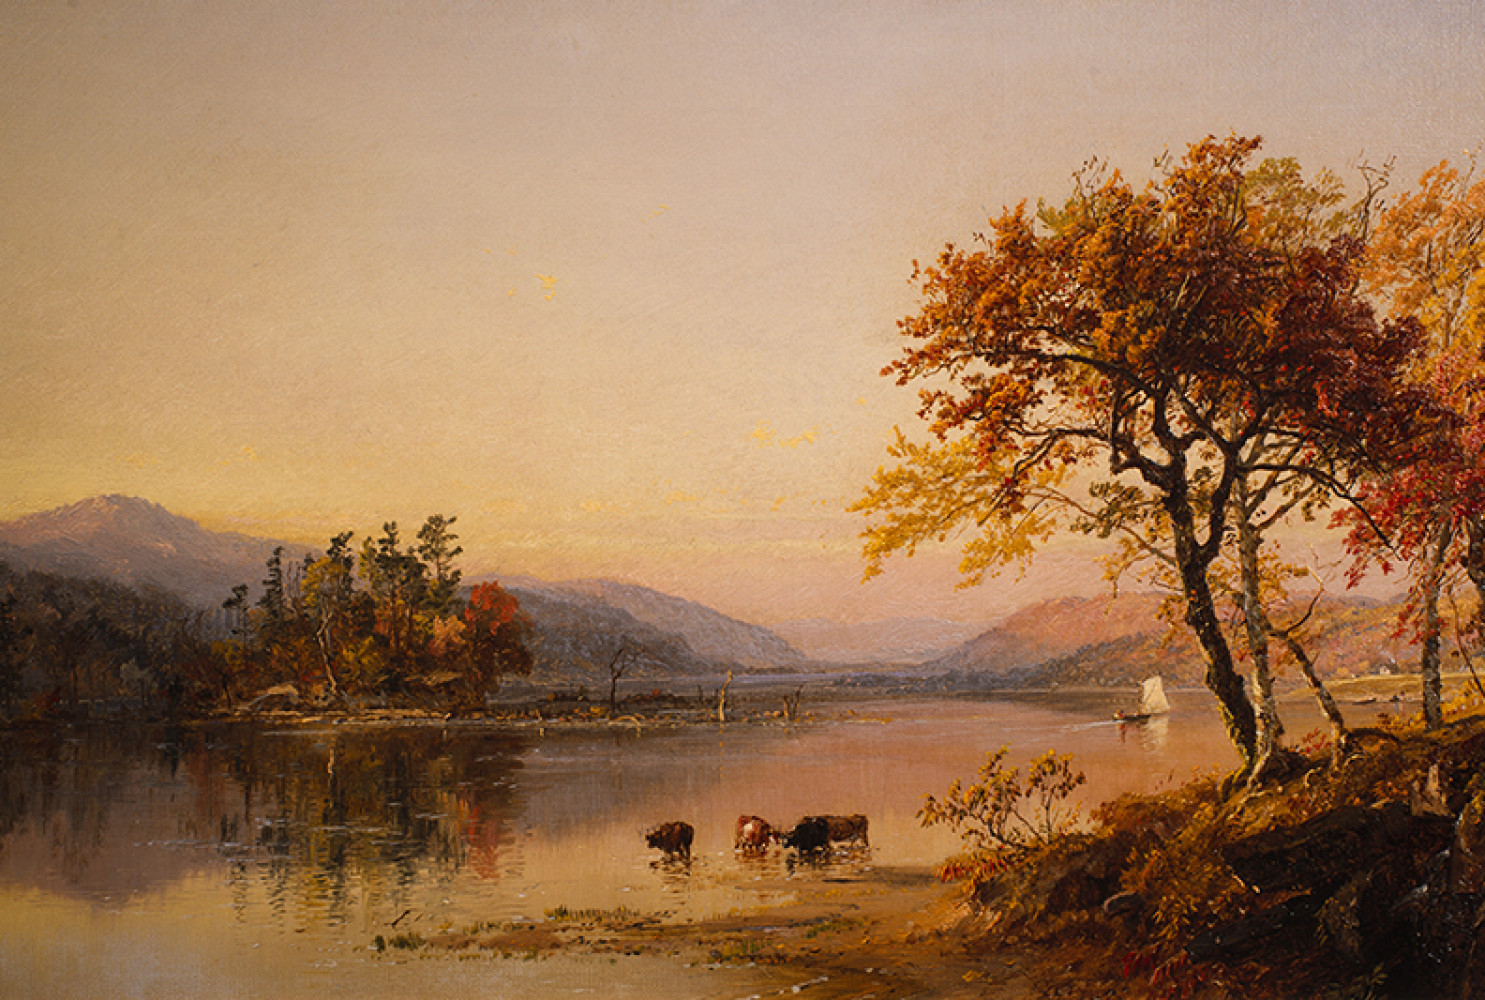 Autumn Afternoon, Greenwood Lake, 1873, by Jasper Francis Cropsey (American, 1823-1900); oil on canvas; 11 x 19 1/2 inches; Courtesy of the Higdon Collection